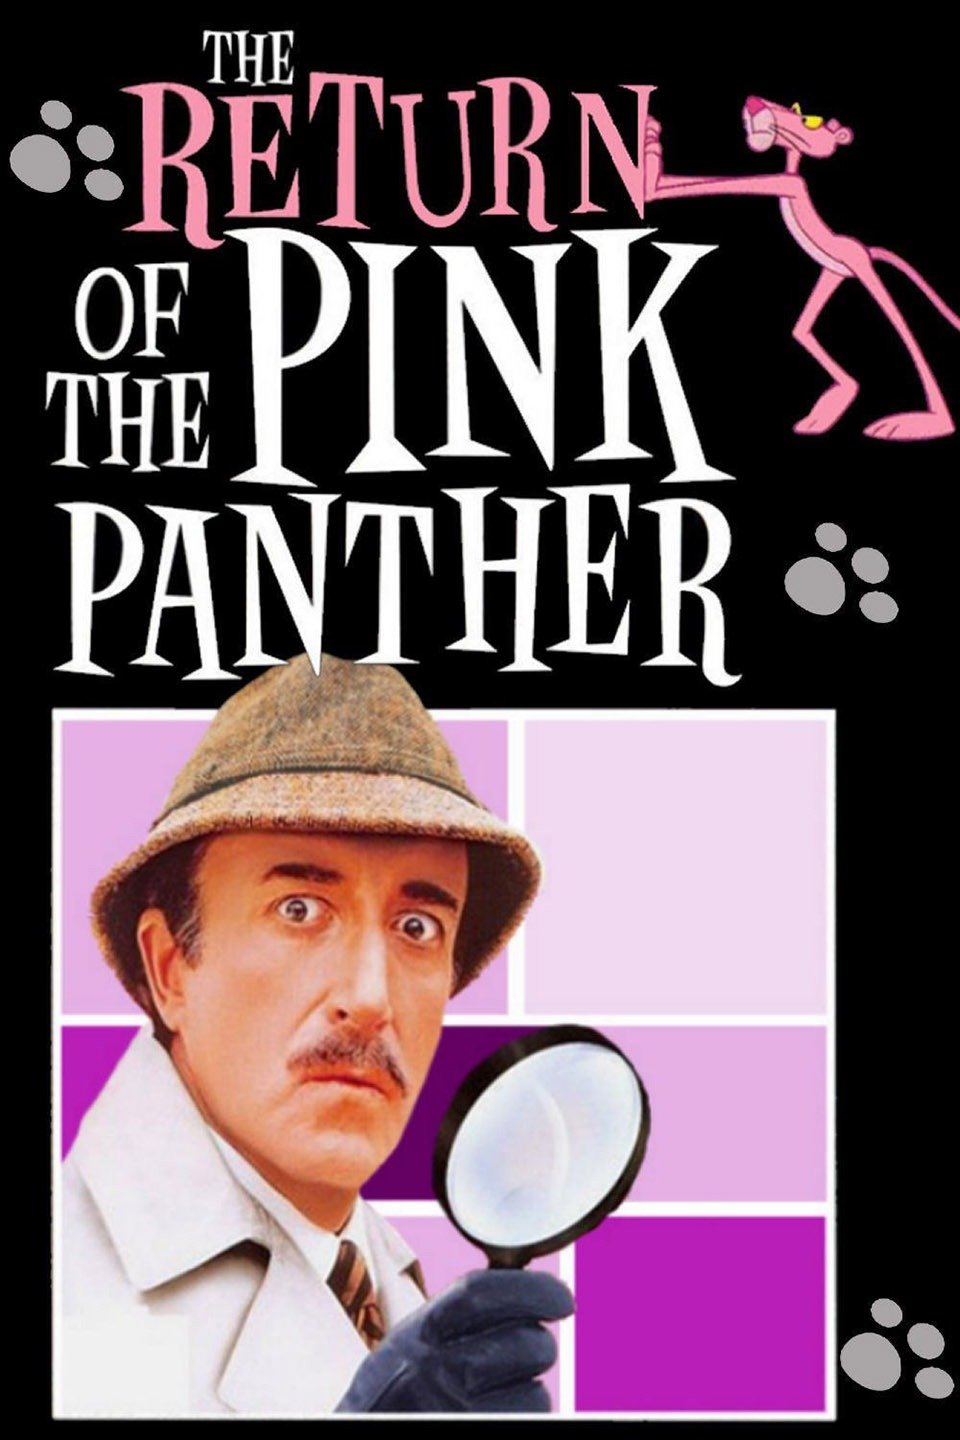 Inspector Clouseau  Peter Sellers Pink Panther POSTER P 